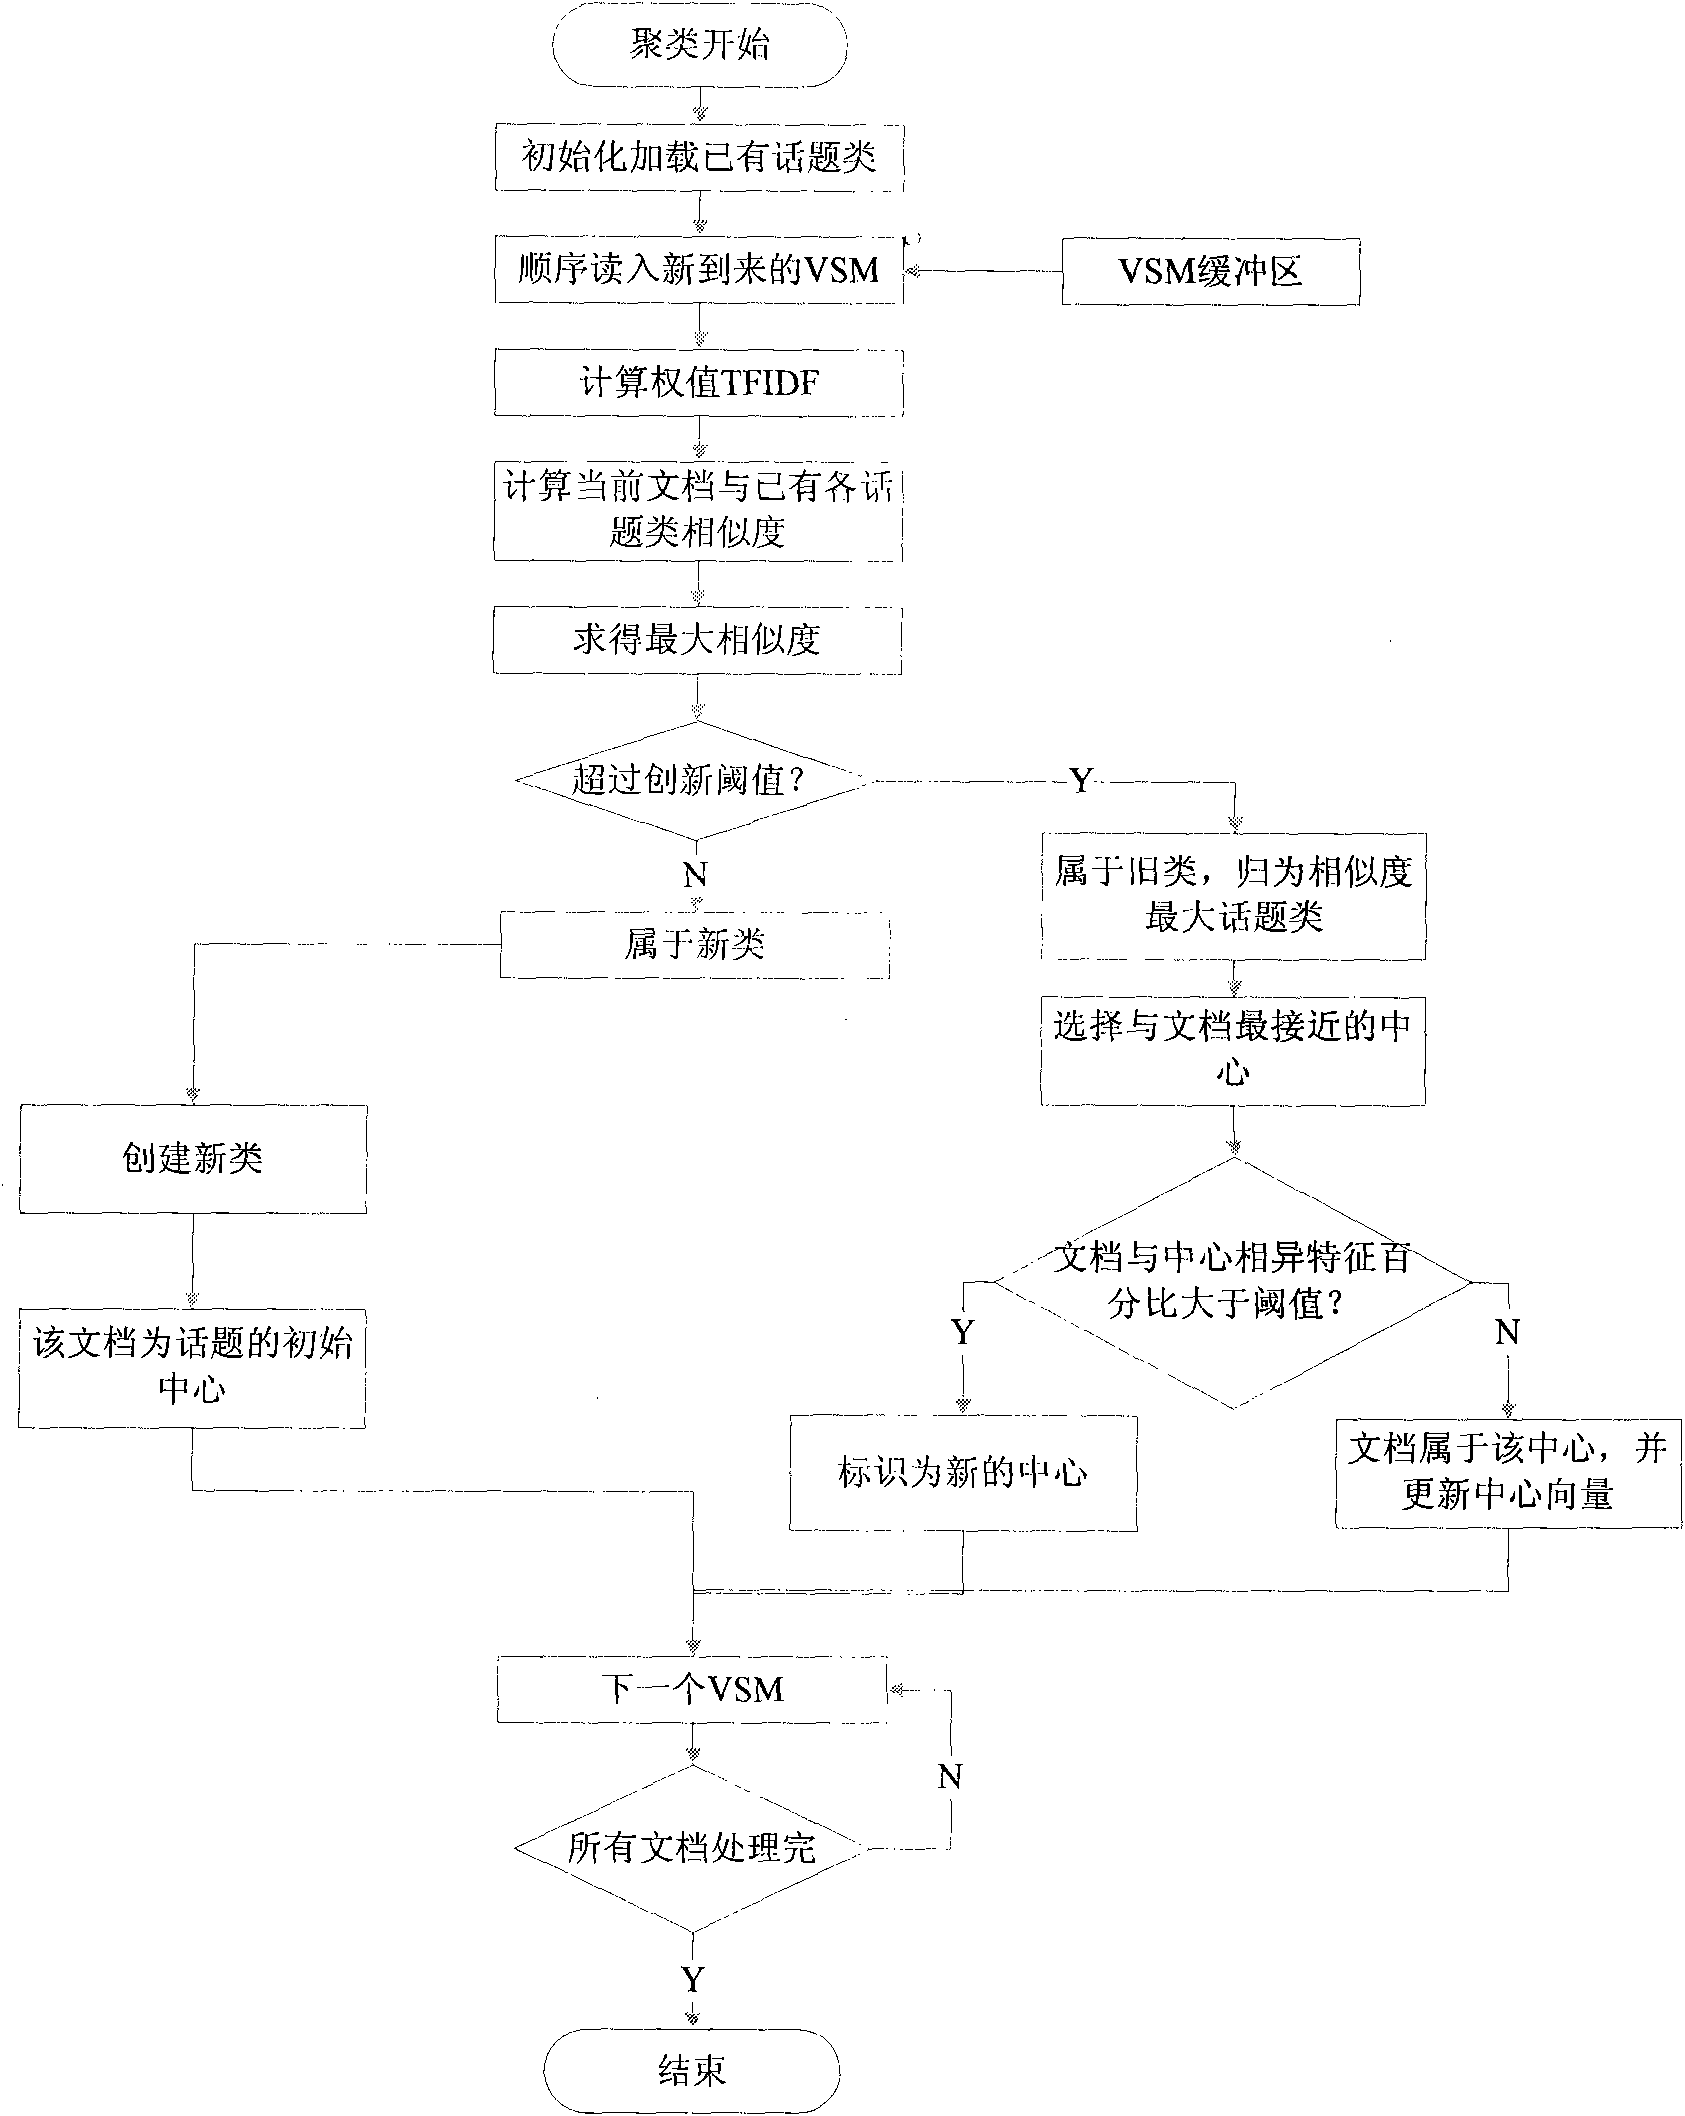 Evolution analysis device and method for contents of network topics